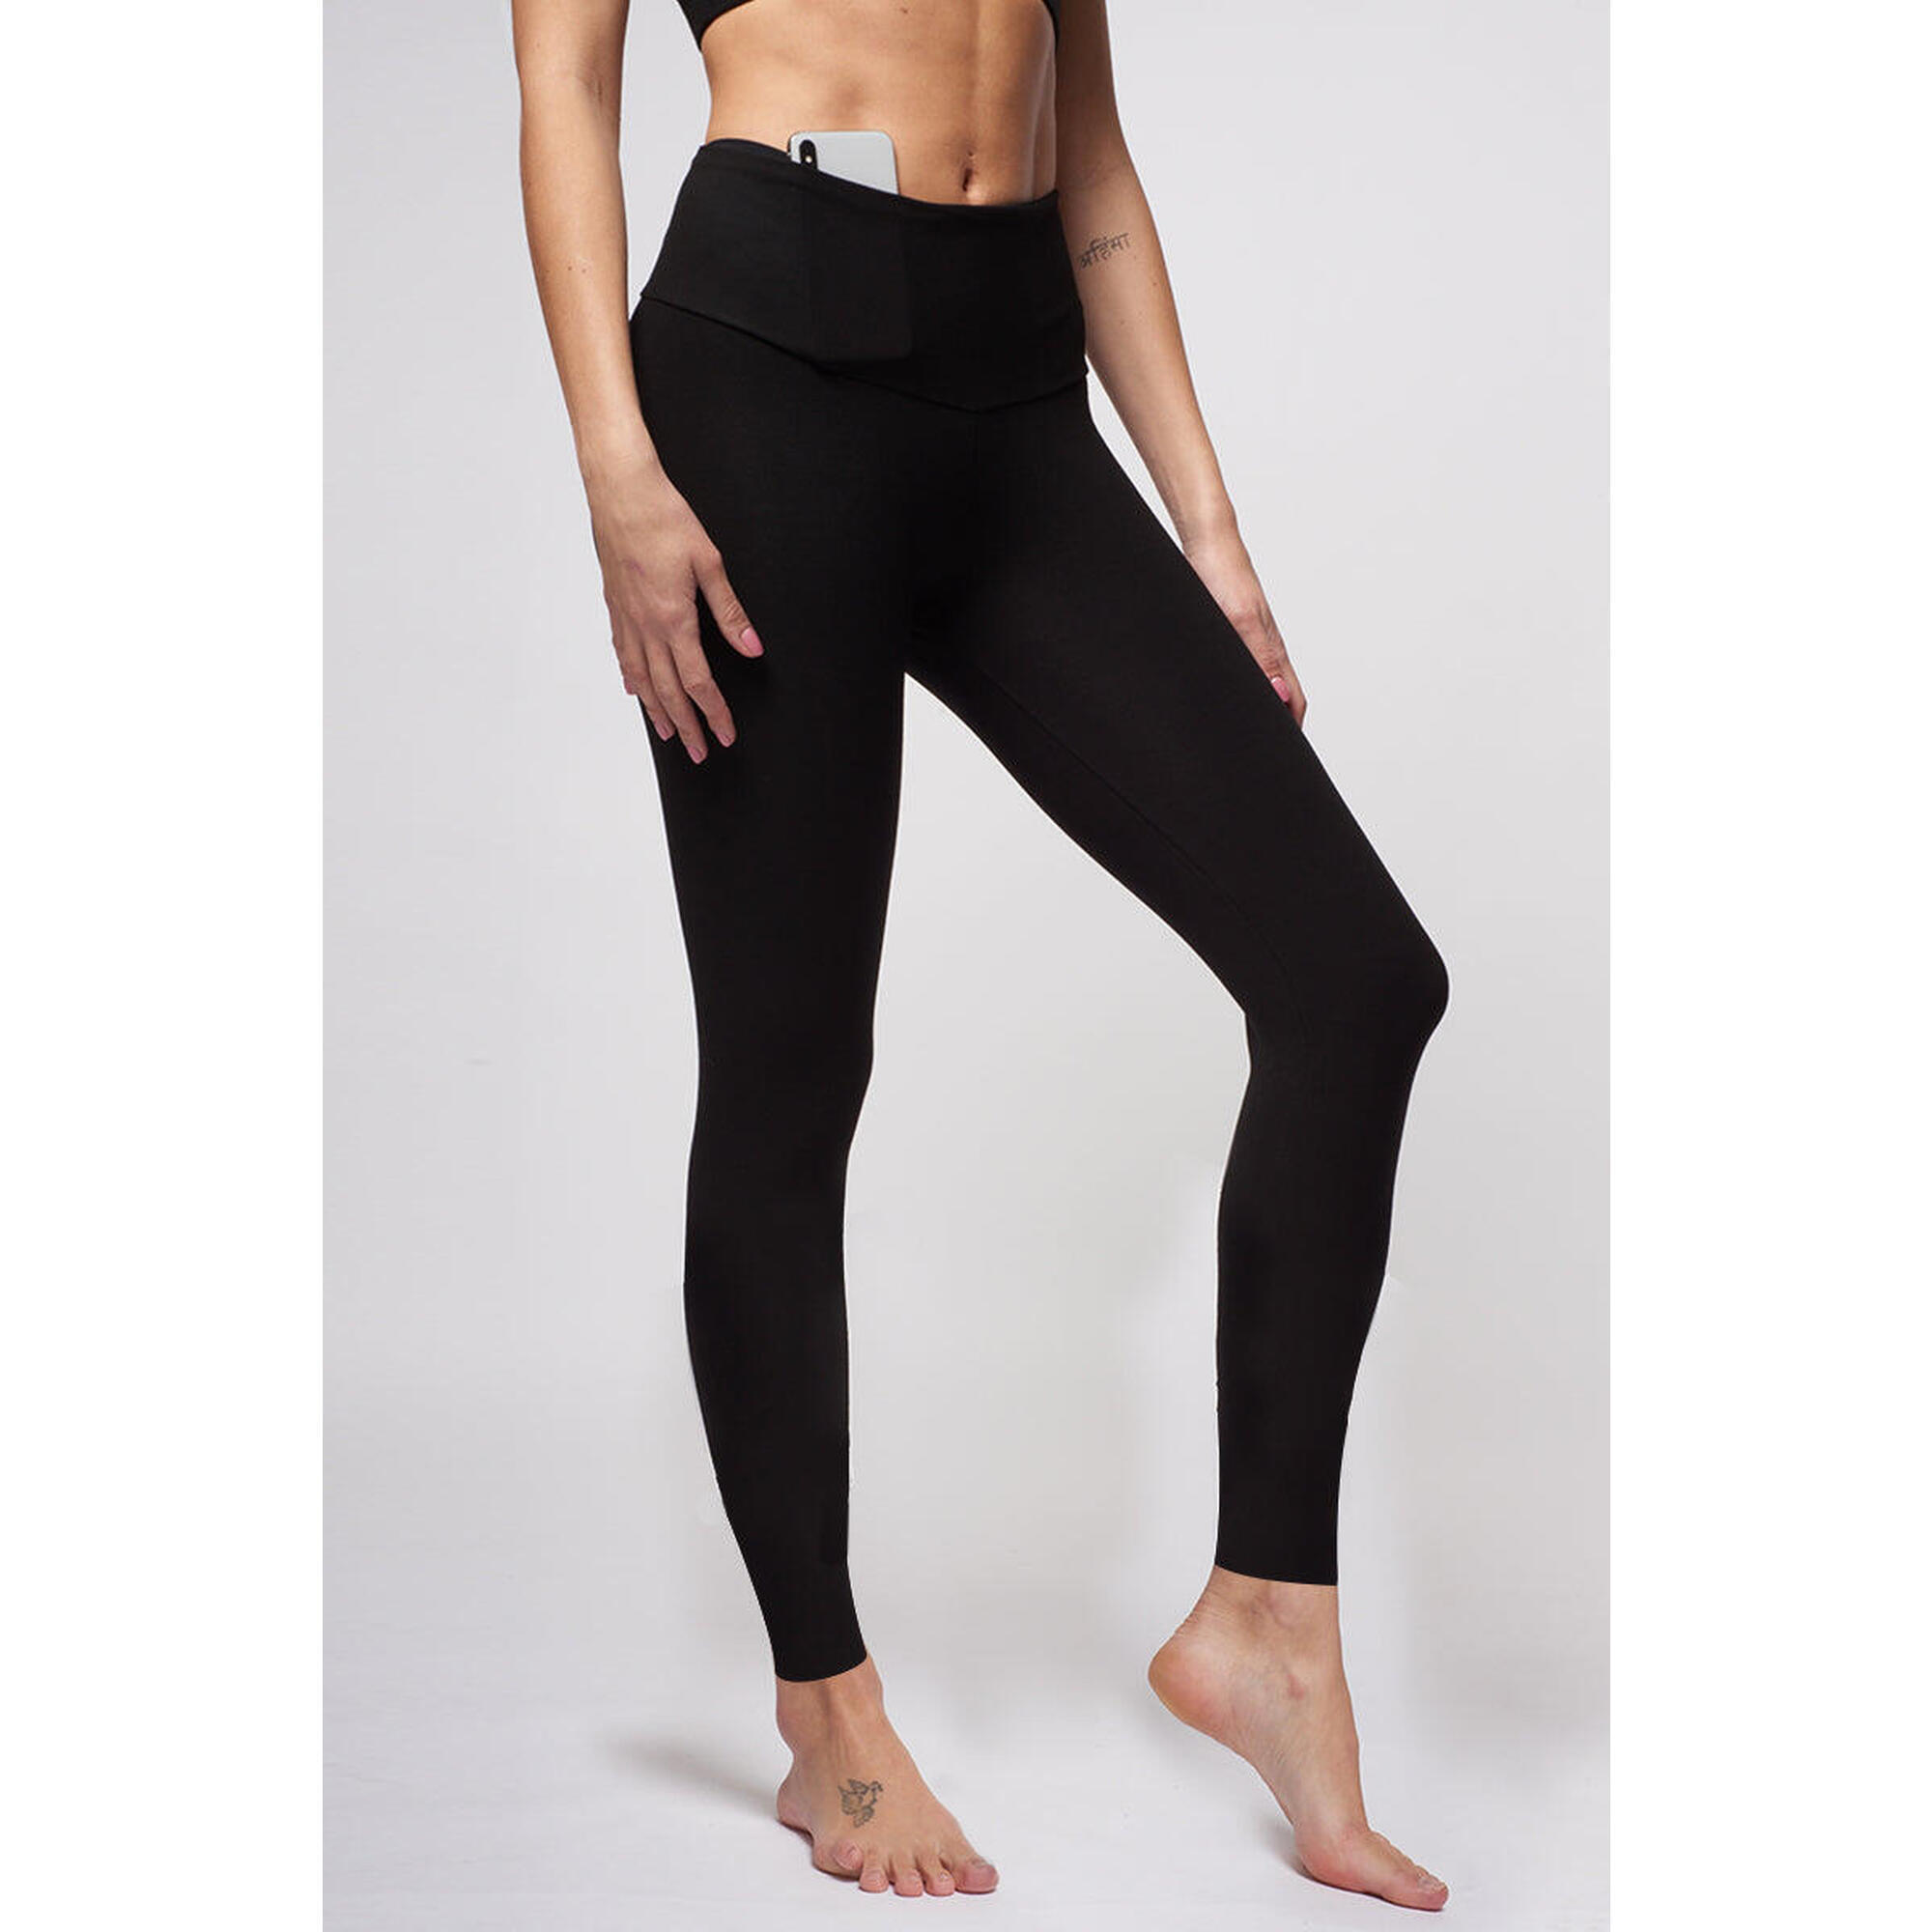 Extra Strong Compression Leggings with Figure Firming Black 1/4